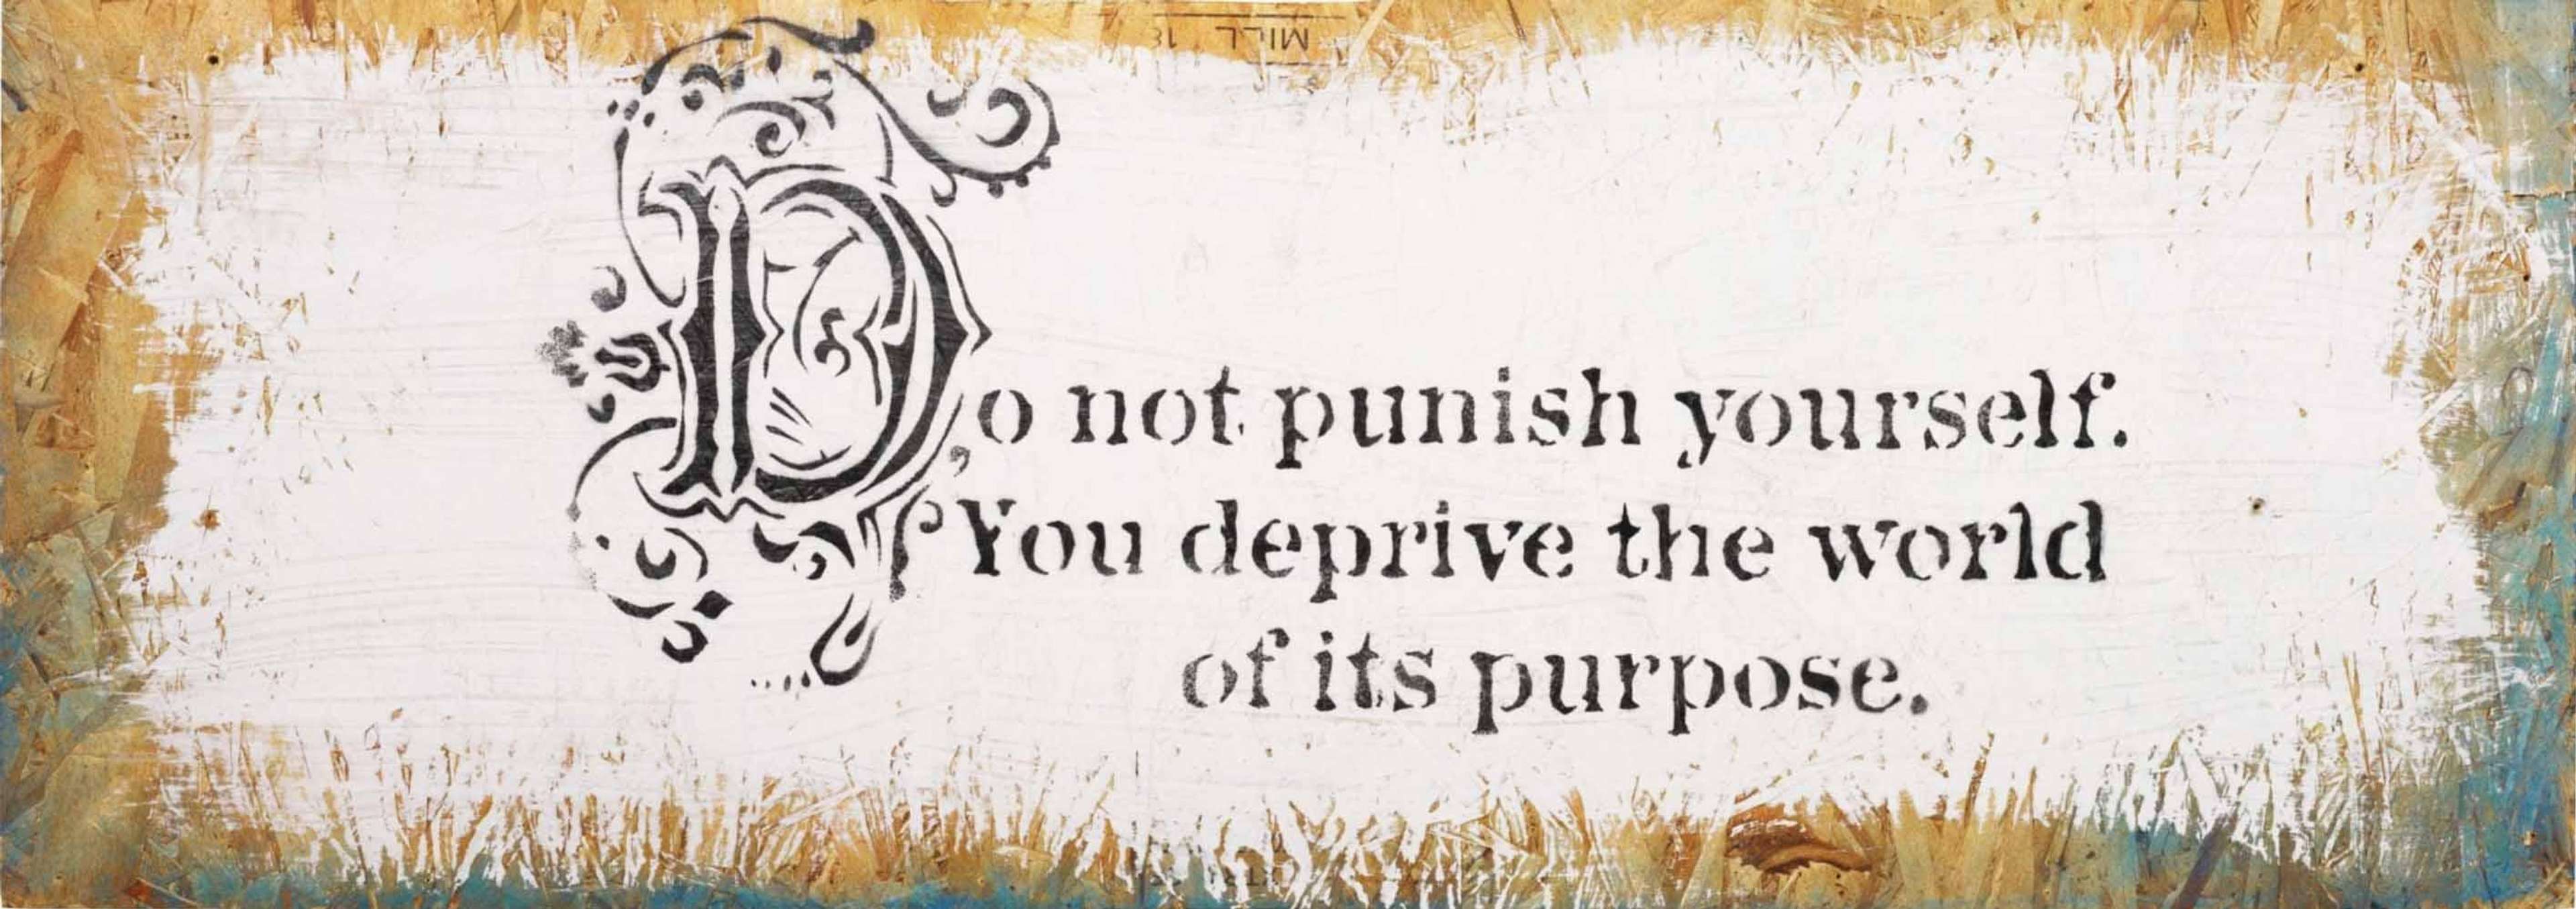 Do Not Punish Yourself delivers a compelling meditation on self-censure and cultural expectation, distilling Banksy's penchant for societal critique into a singular poignant phrase: "Do not punish yourself. You deprive the world of its purpose".